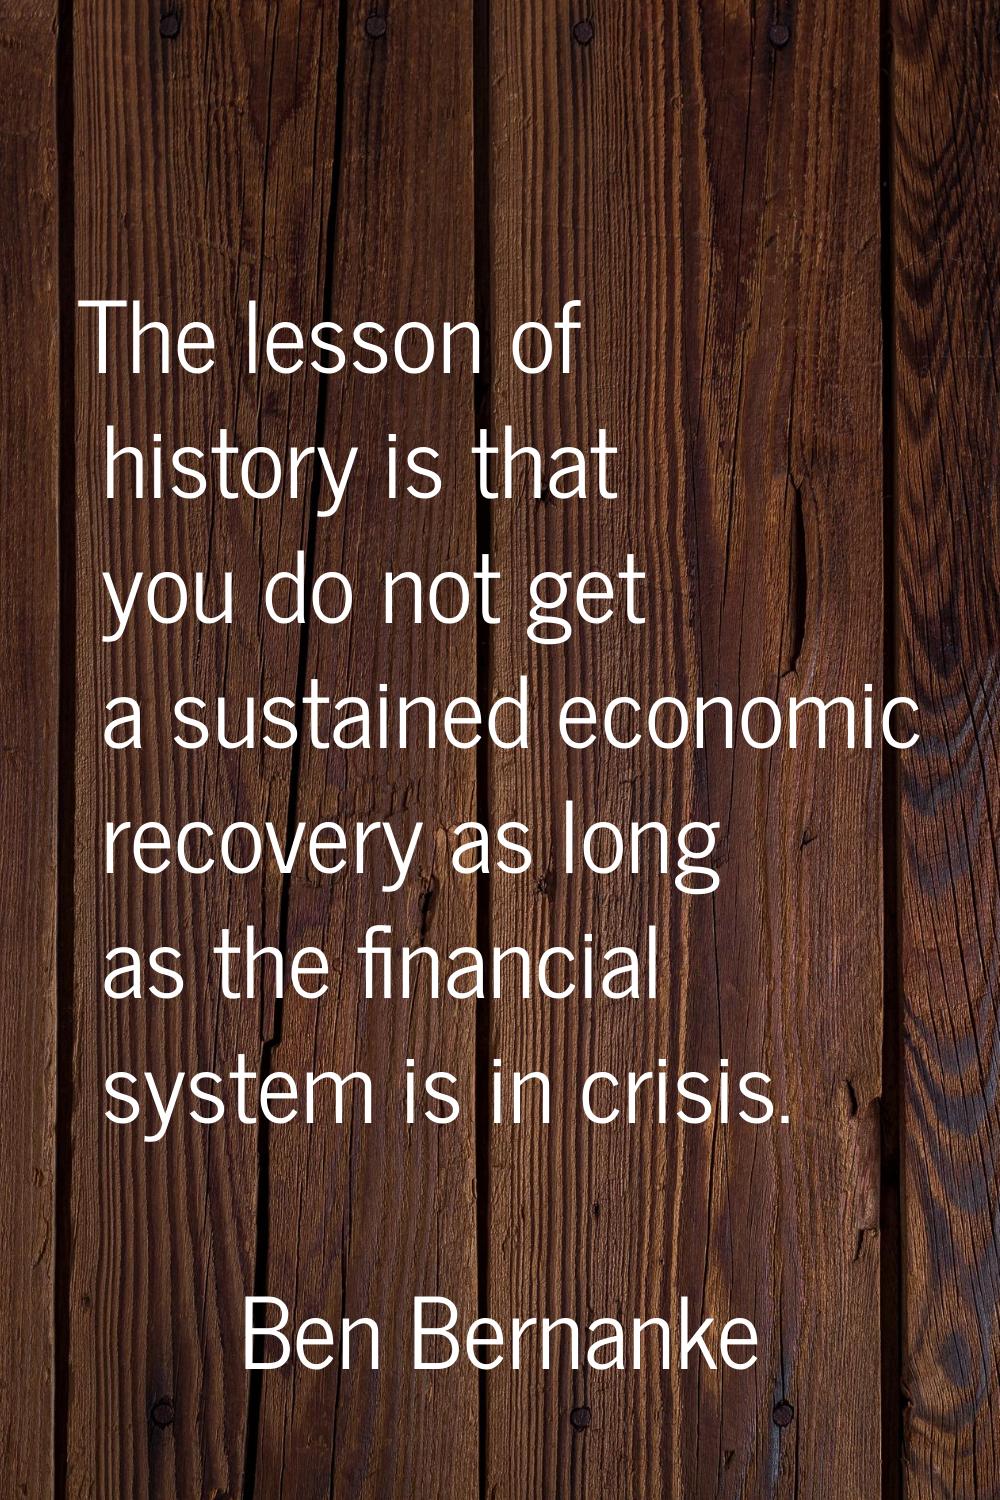 The lesson of history is that you do not get a sustained economic recovery as long as the financial